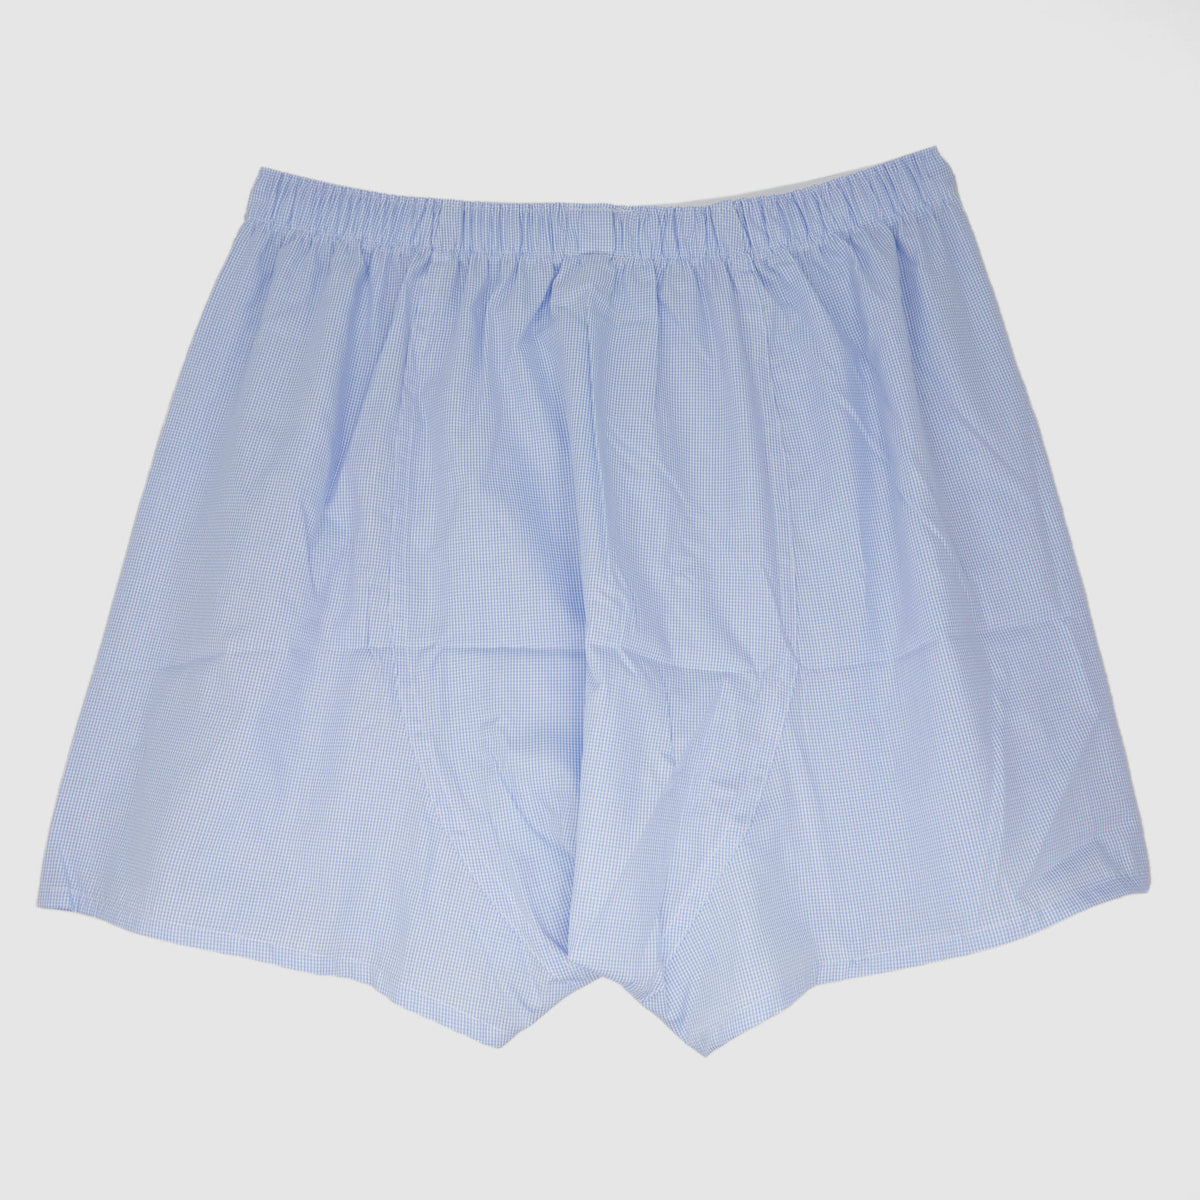 Sunspel Classic Micro Gingham Boxers